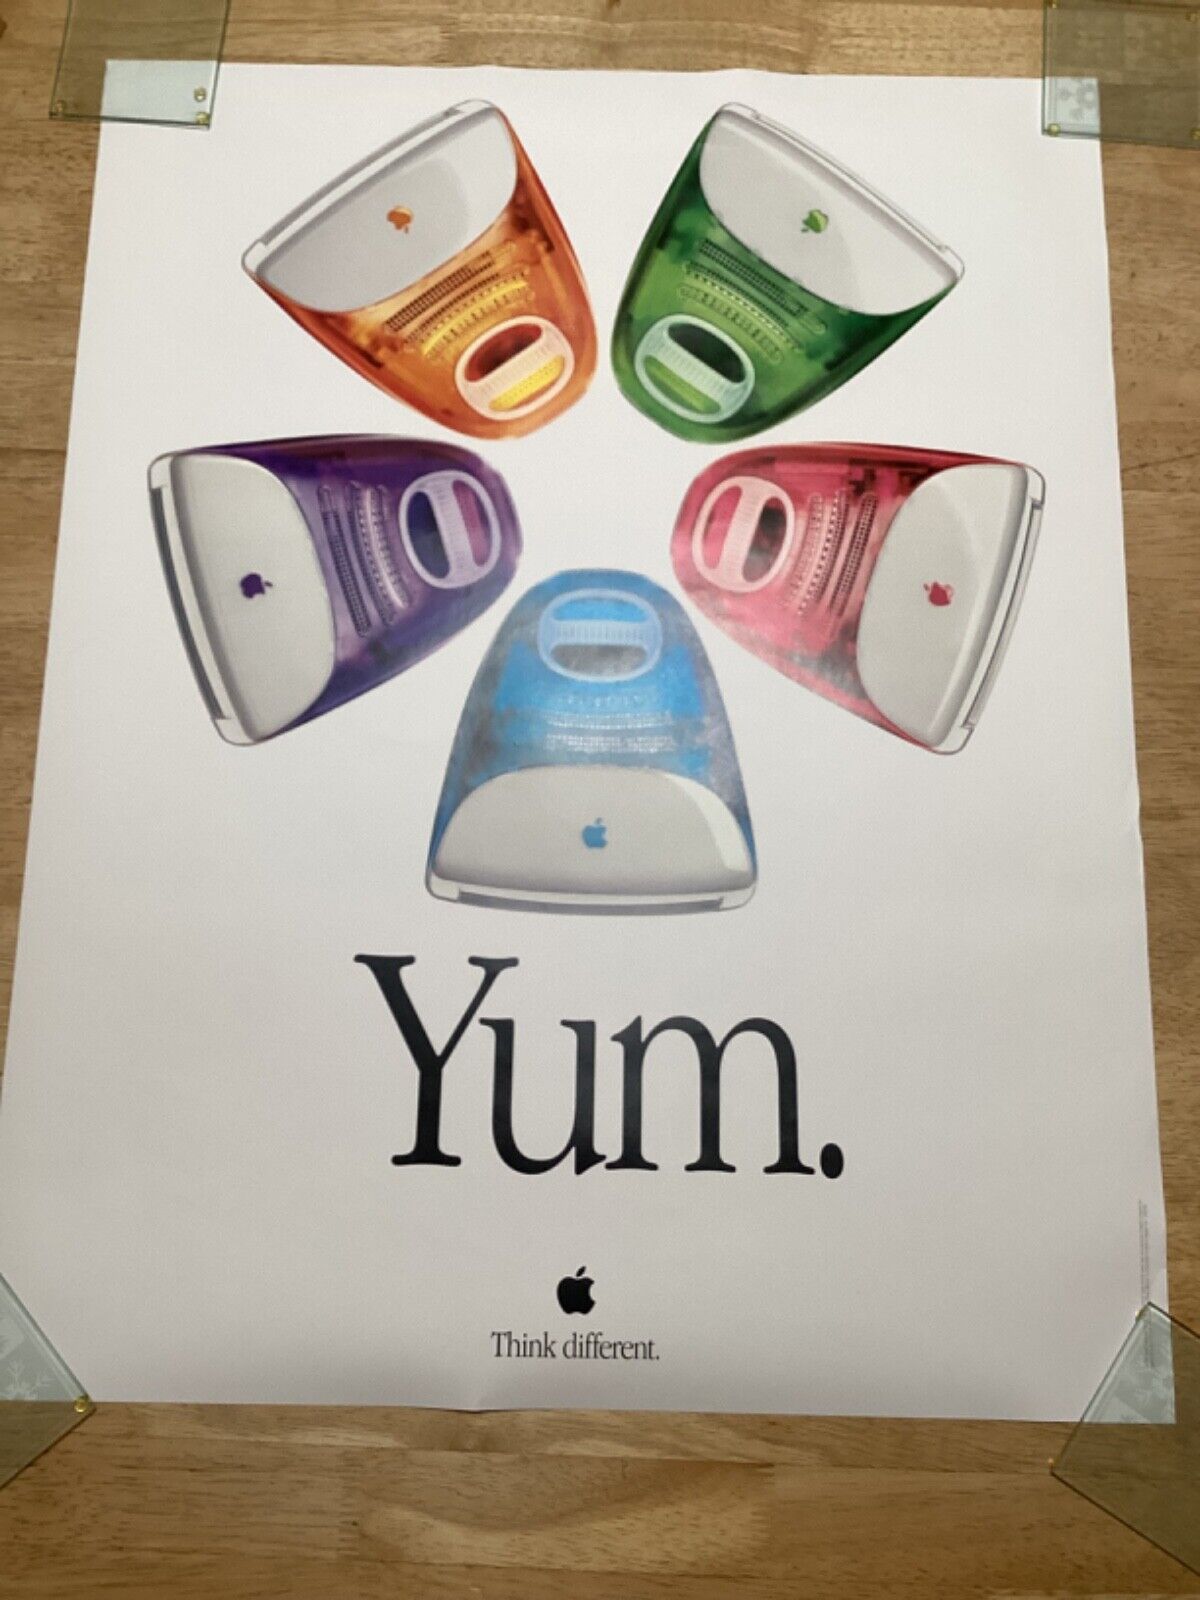 Vintage 1999 Apple Computer iMac G3 YUM Think Different Poster  22x28”